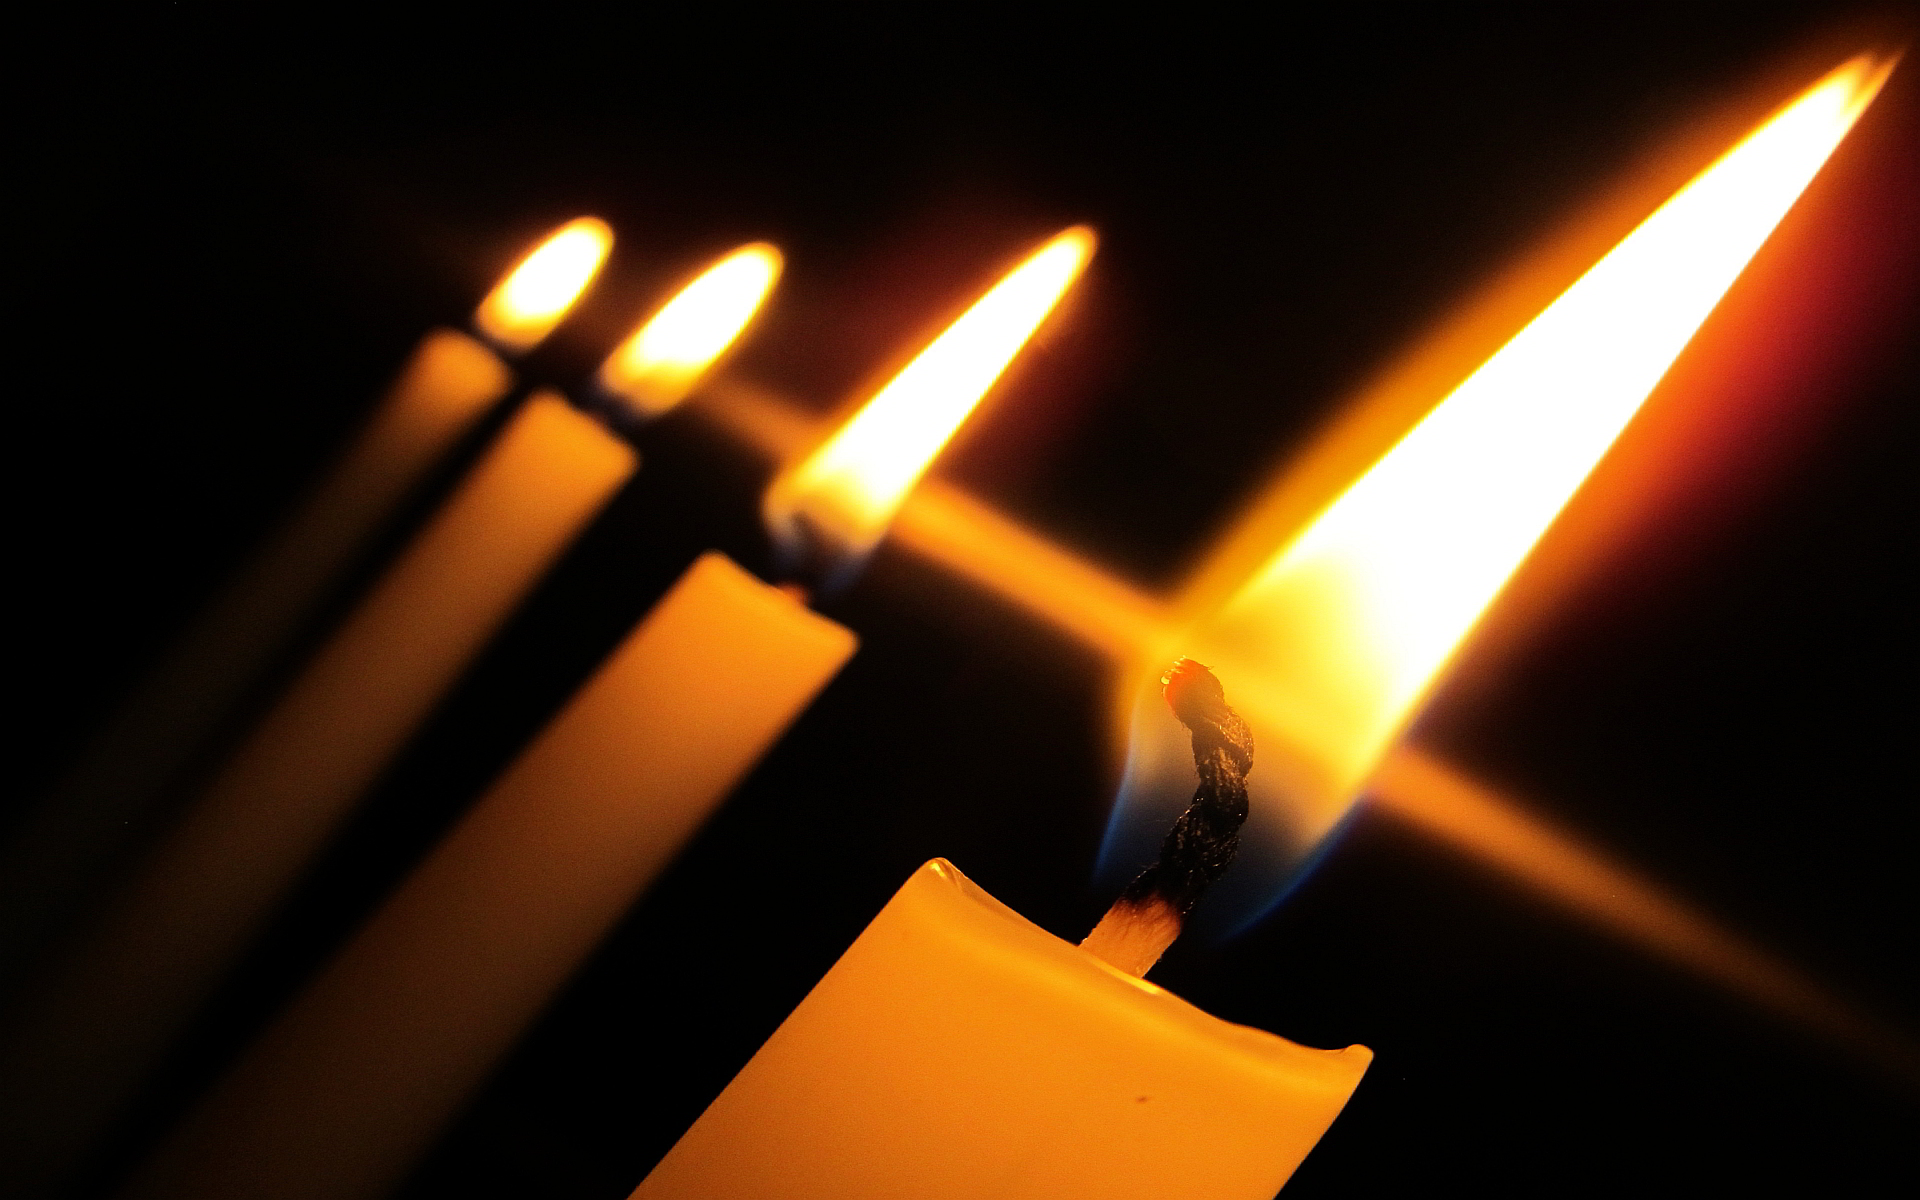 Lit candles - Dark with lights wallpaper